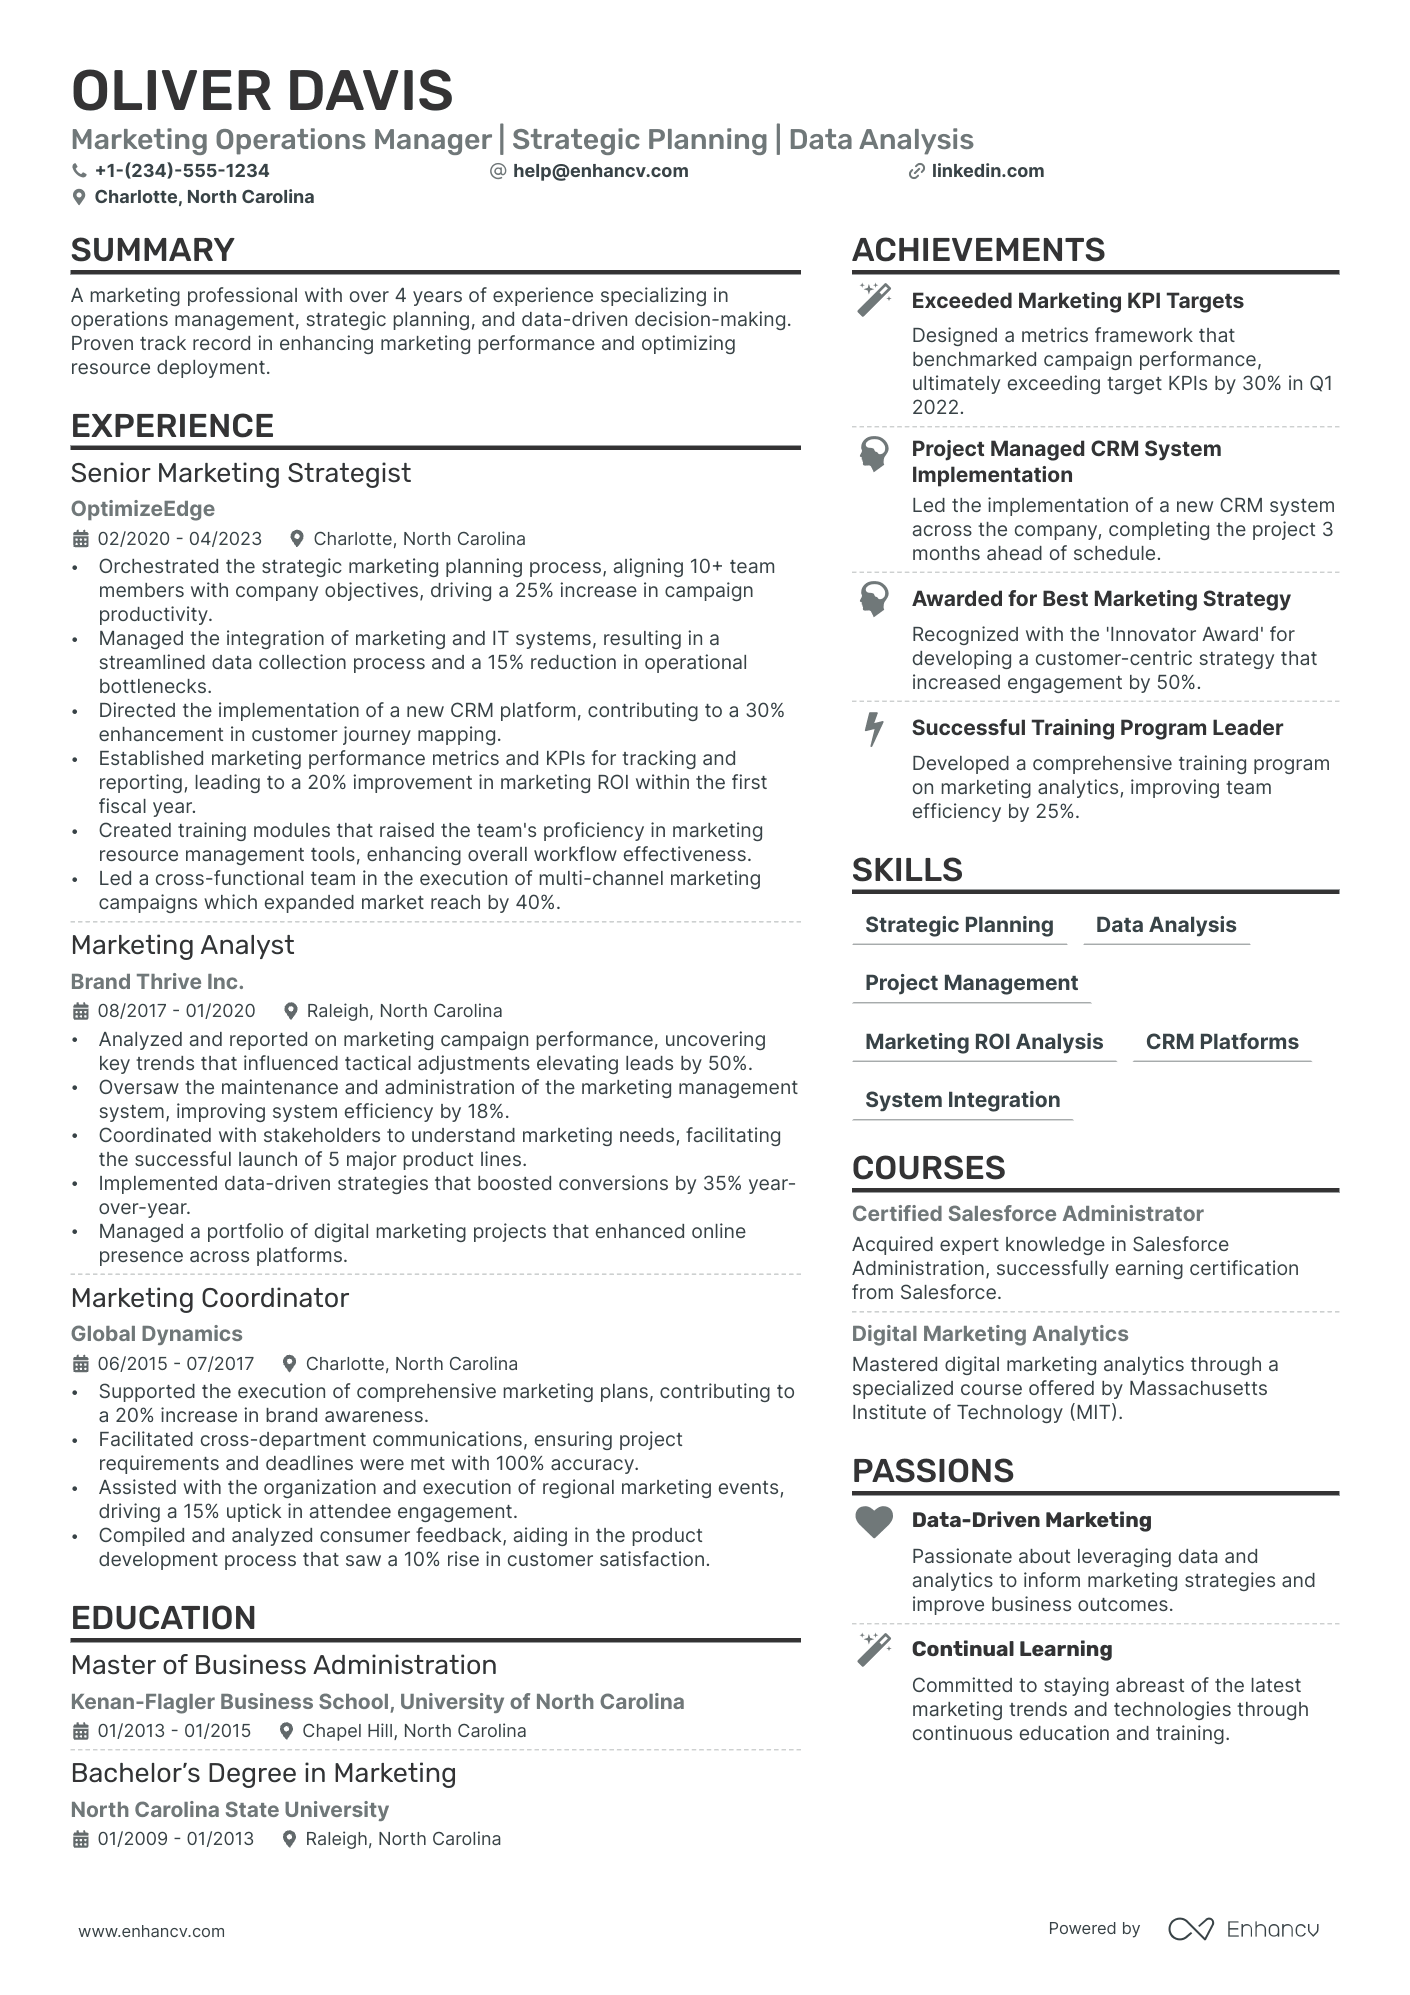 Marketing Operations Manager resume example